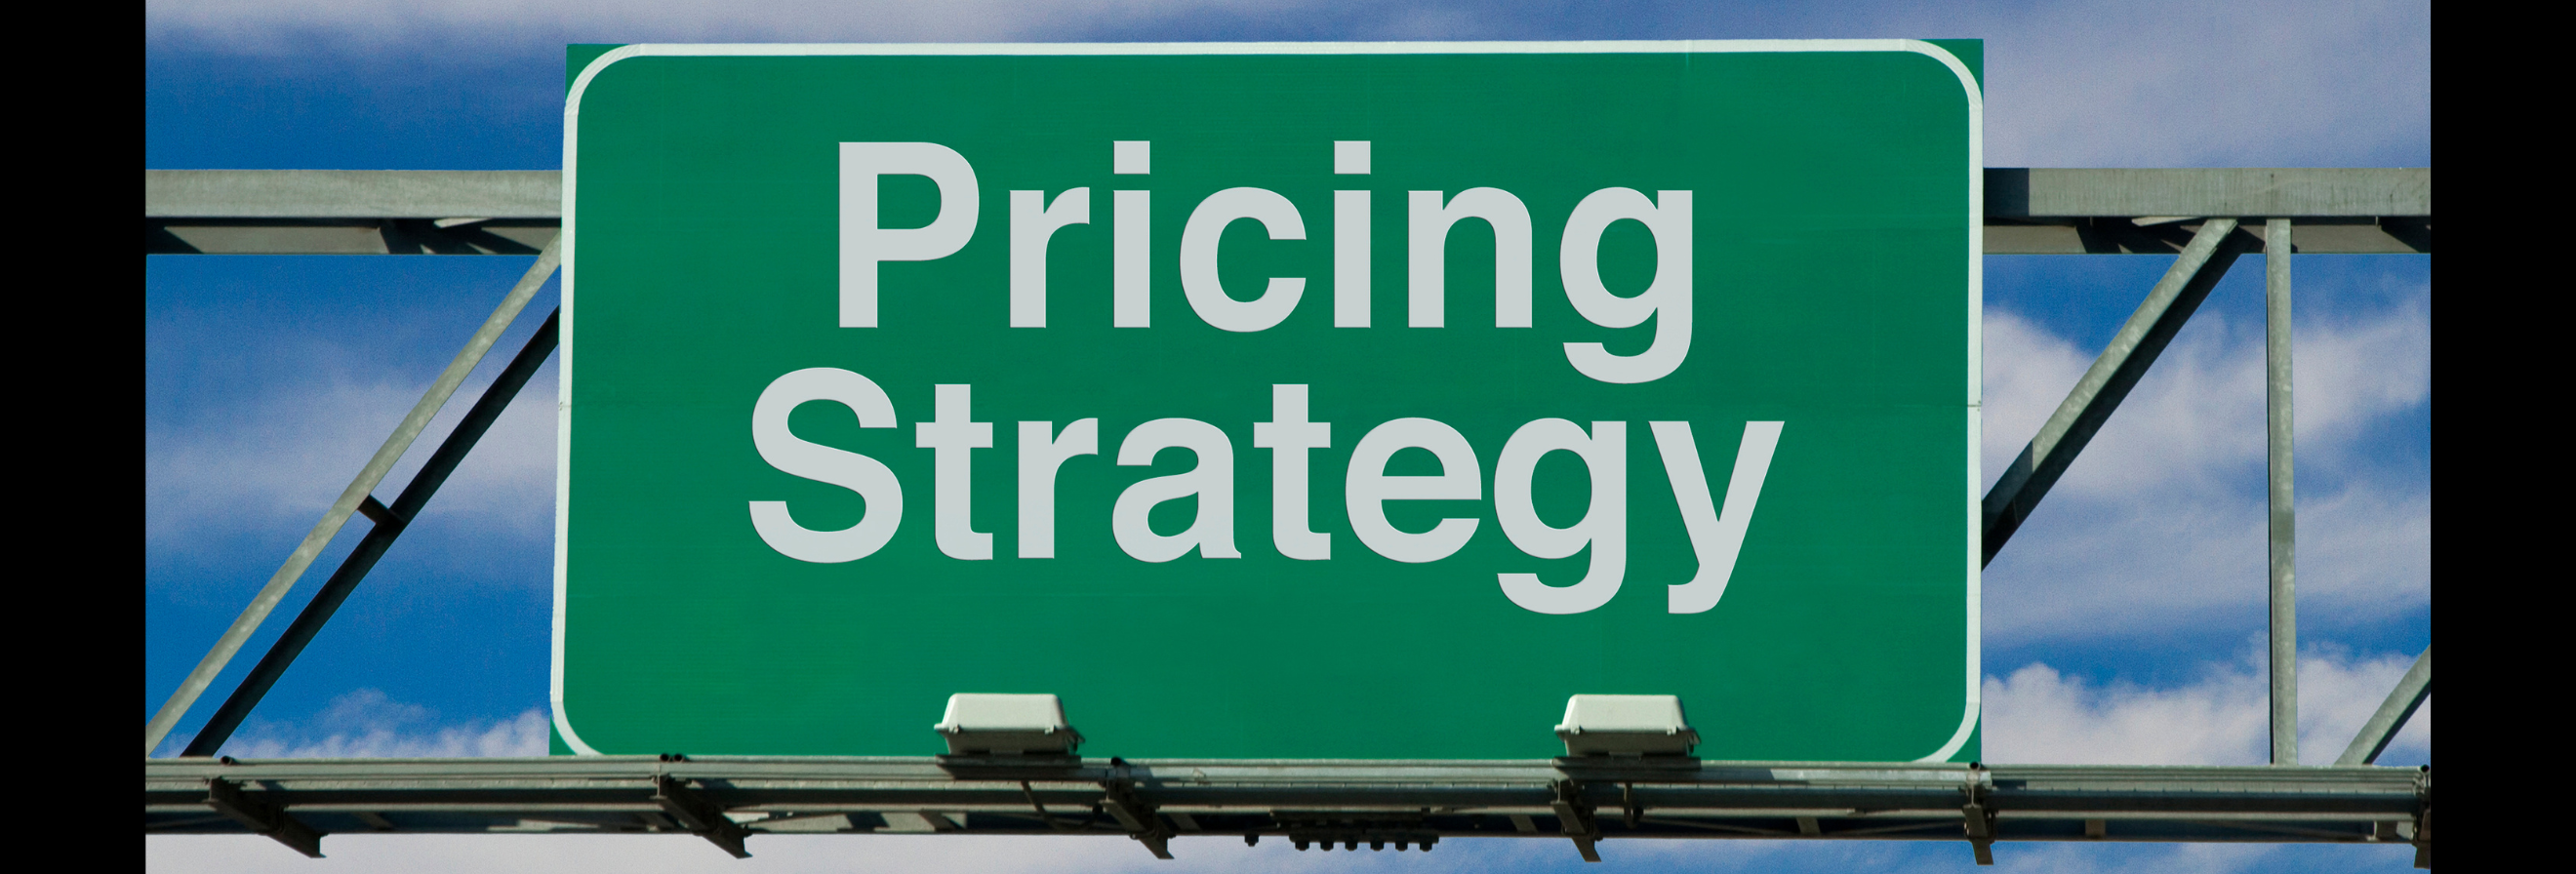 Pricing Strategy Road Sign